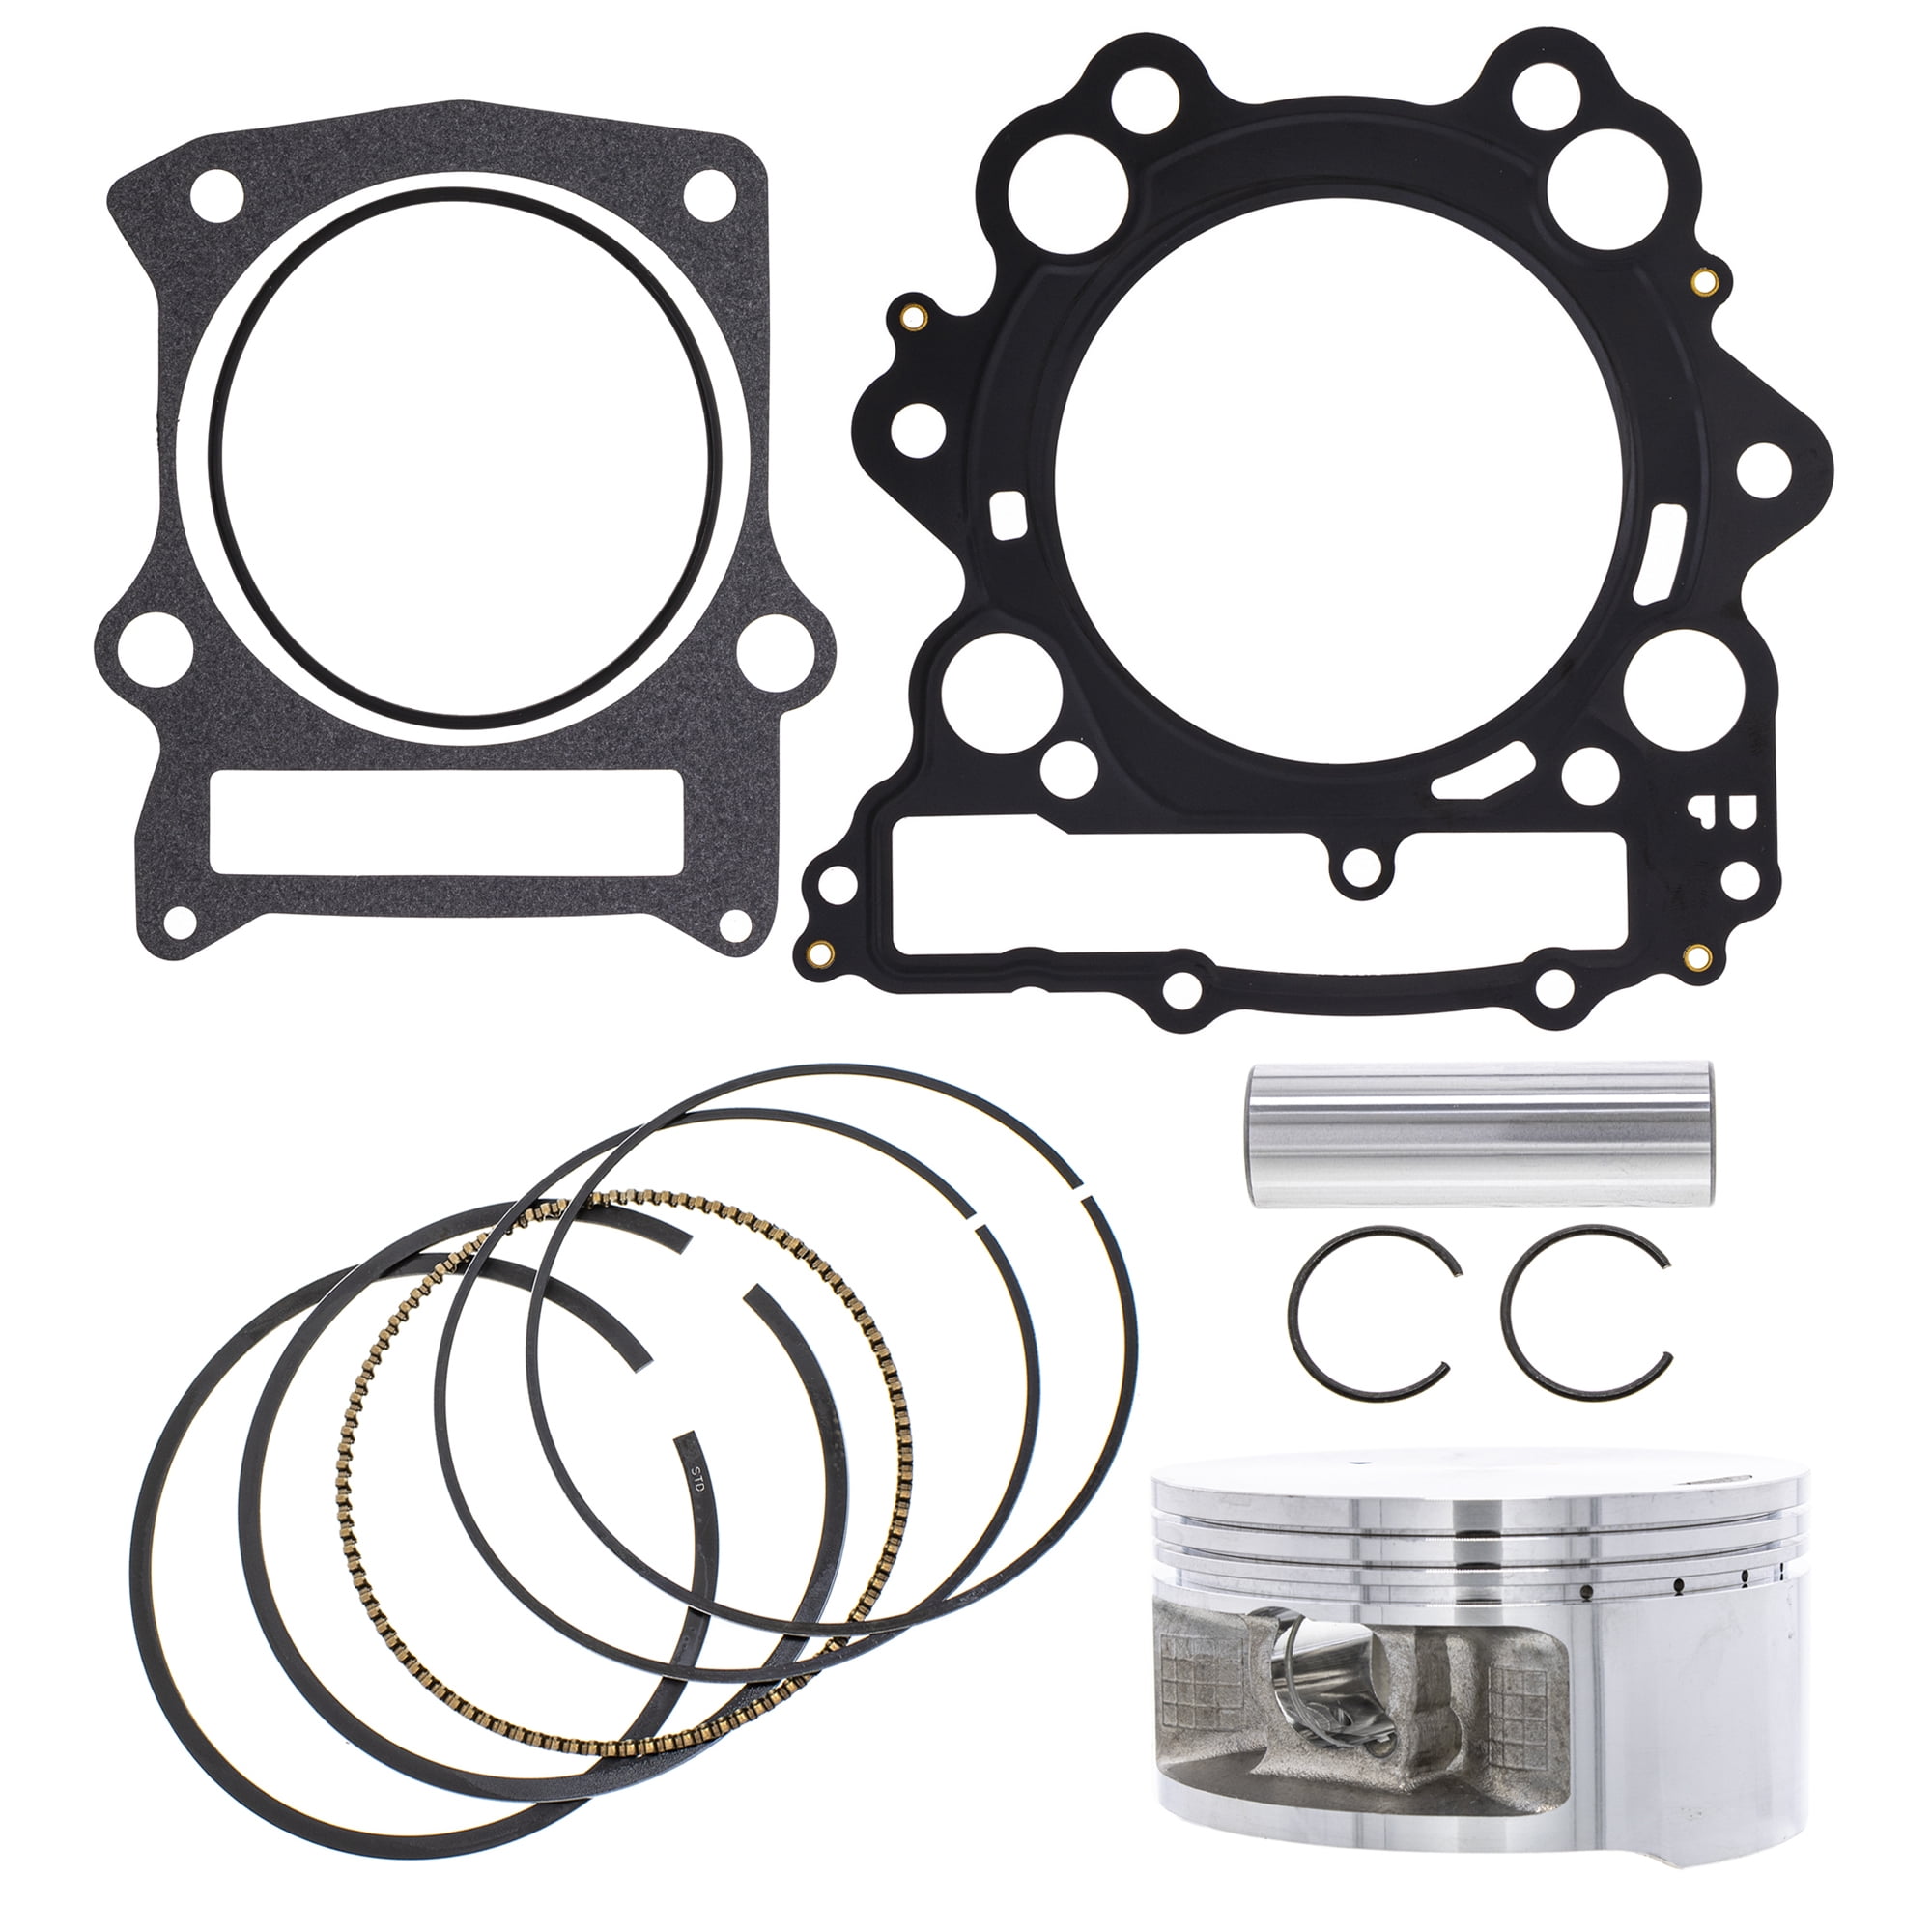 Niche 686cc 102mm 10:1 Big Bore Piston Gasket Kit for Yamaha Grizzly 660  MK1000935